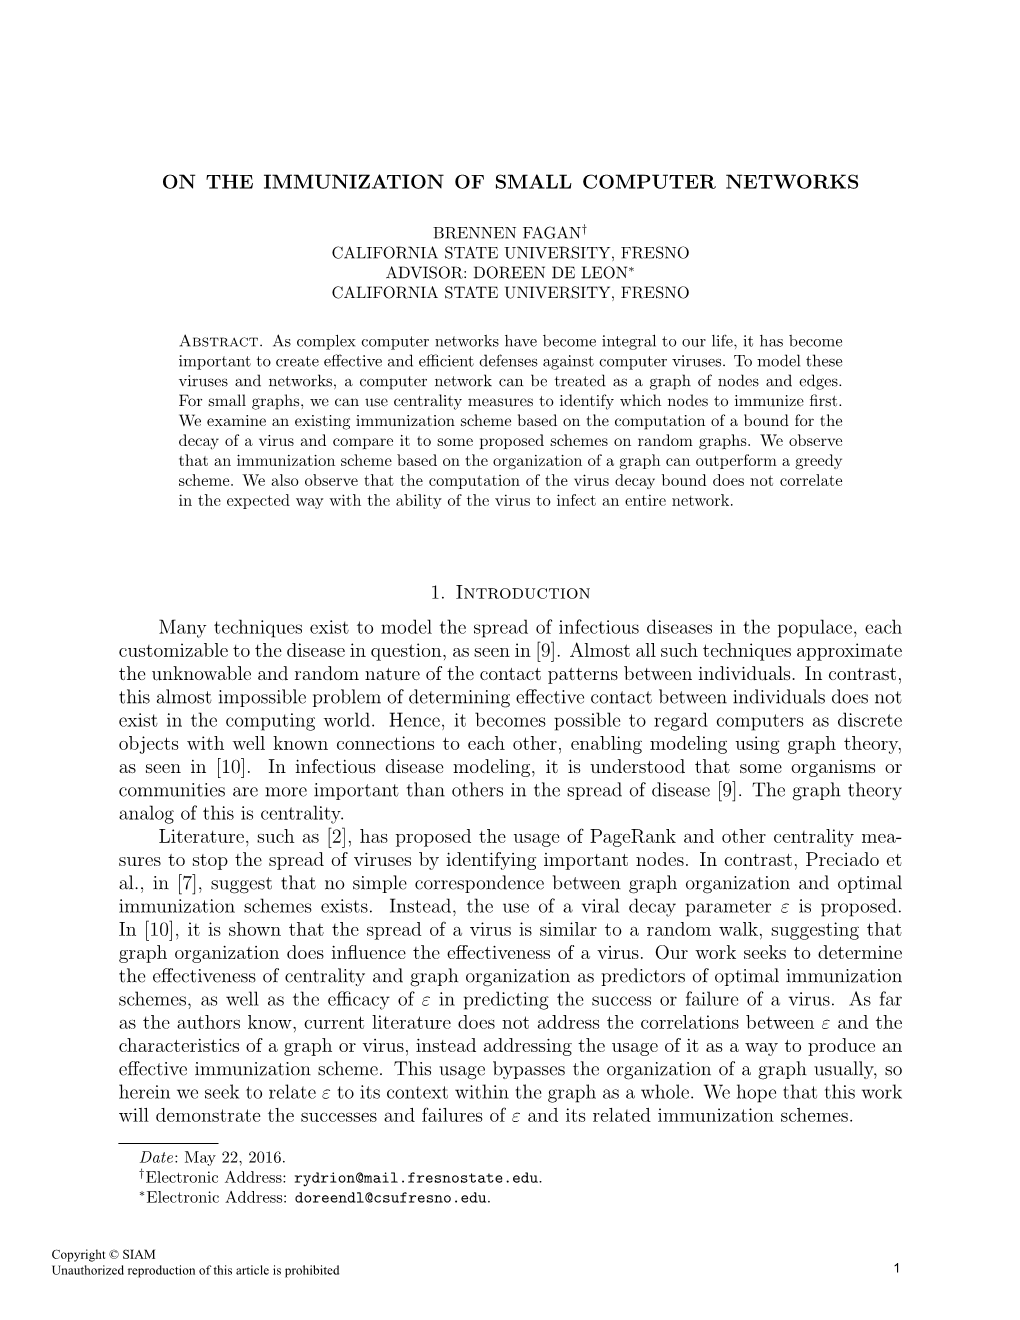 On the Immunization of Small Computer Networks